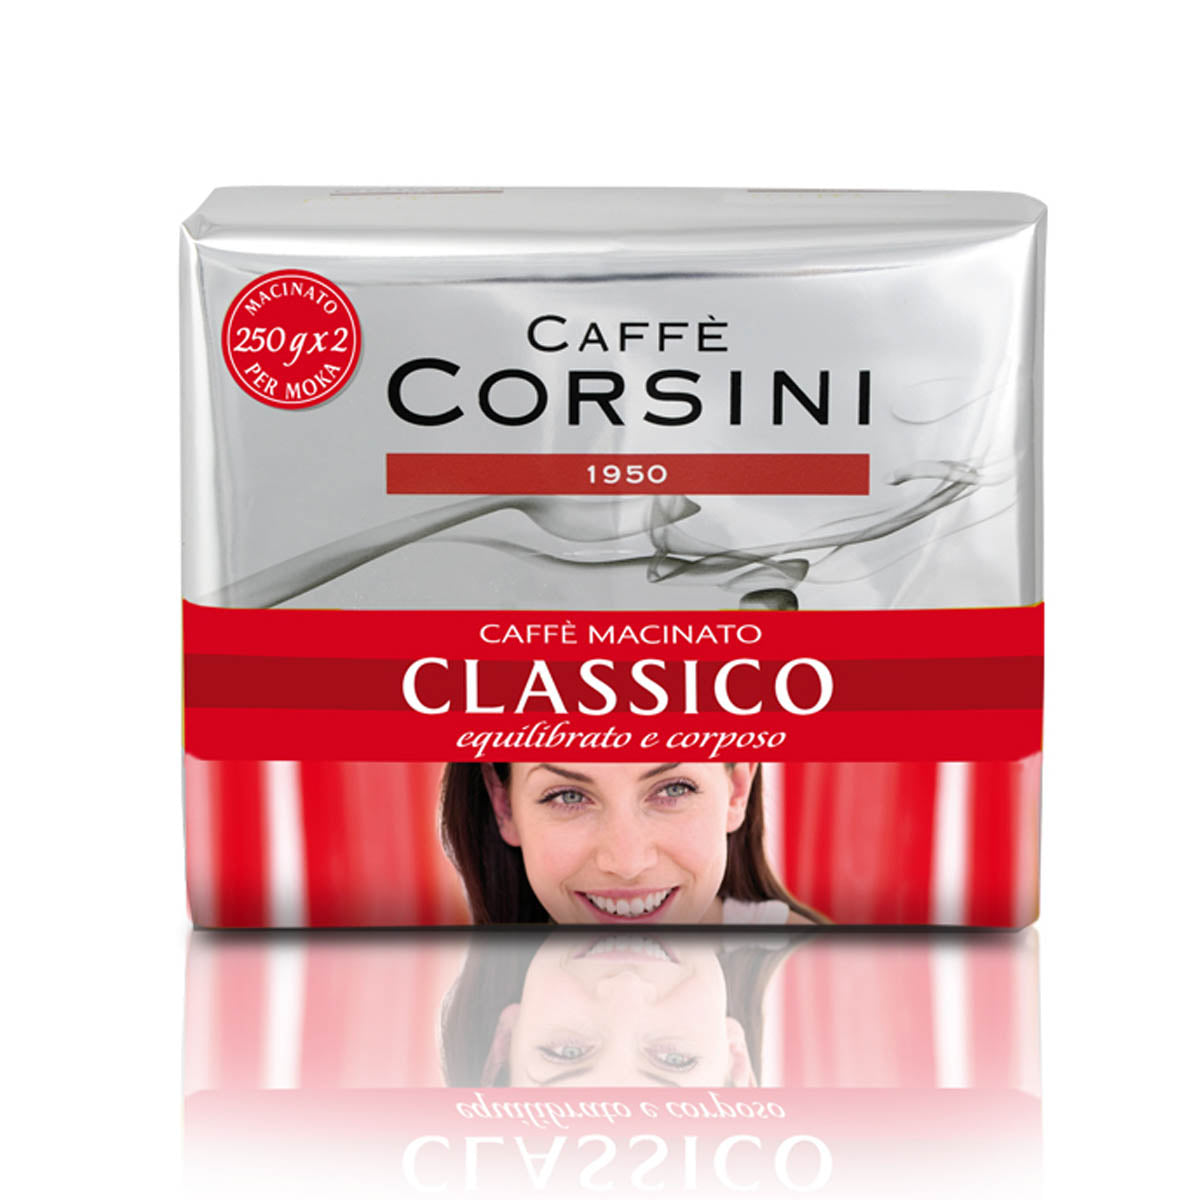 Ground coffee | Classico | Pack containing 2 packets of 250g each